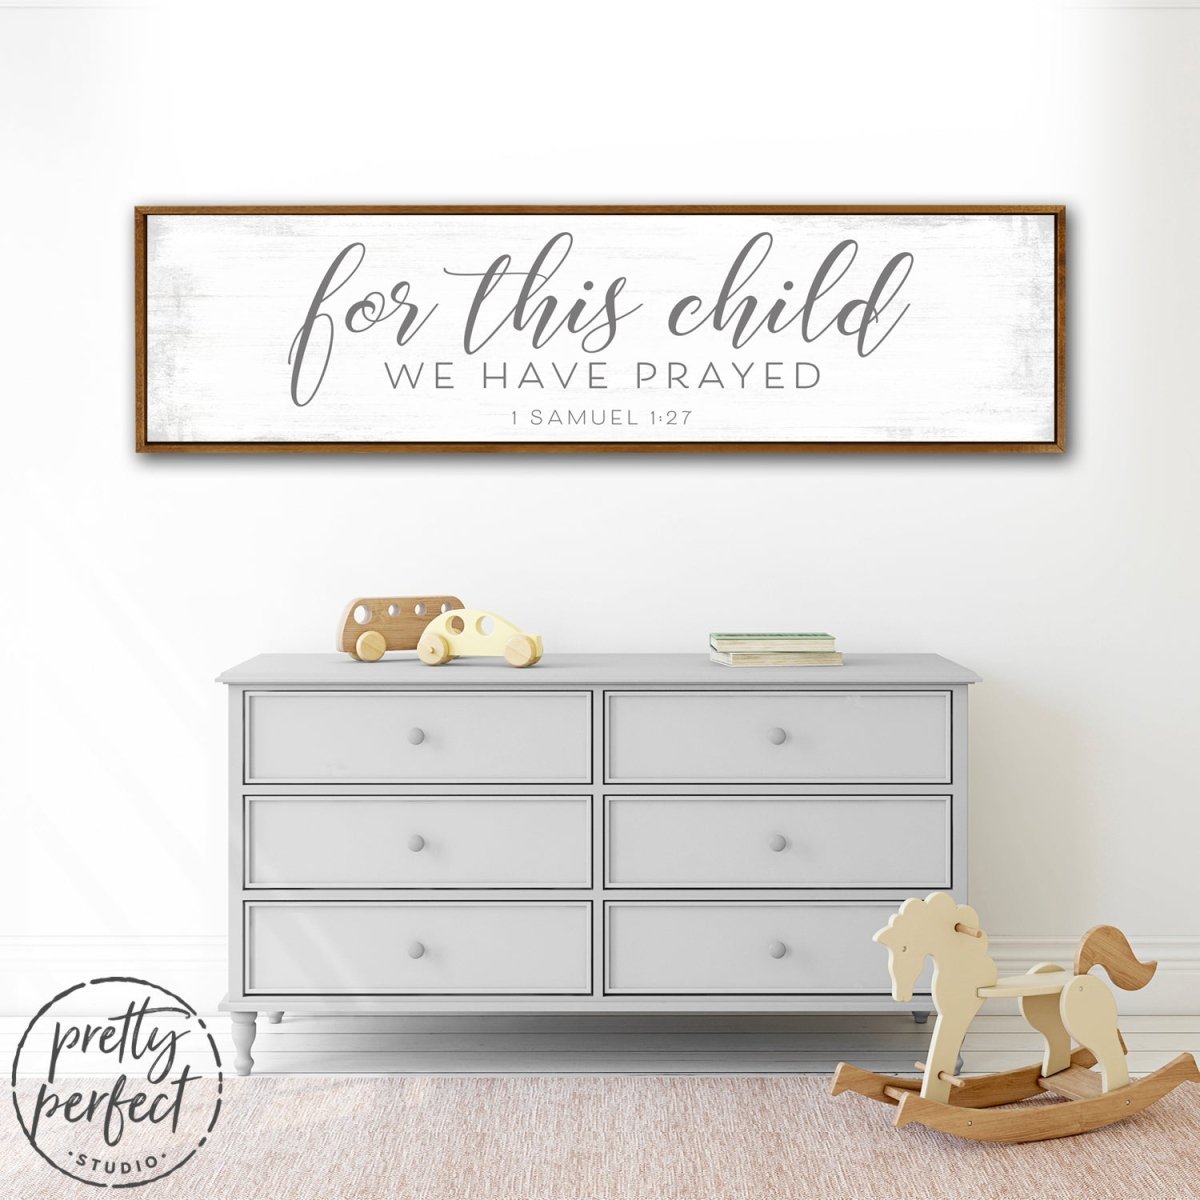 For This Child We Have Prayed Bible Verse Sign Above Dresser - Pretty Perfect Studio